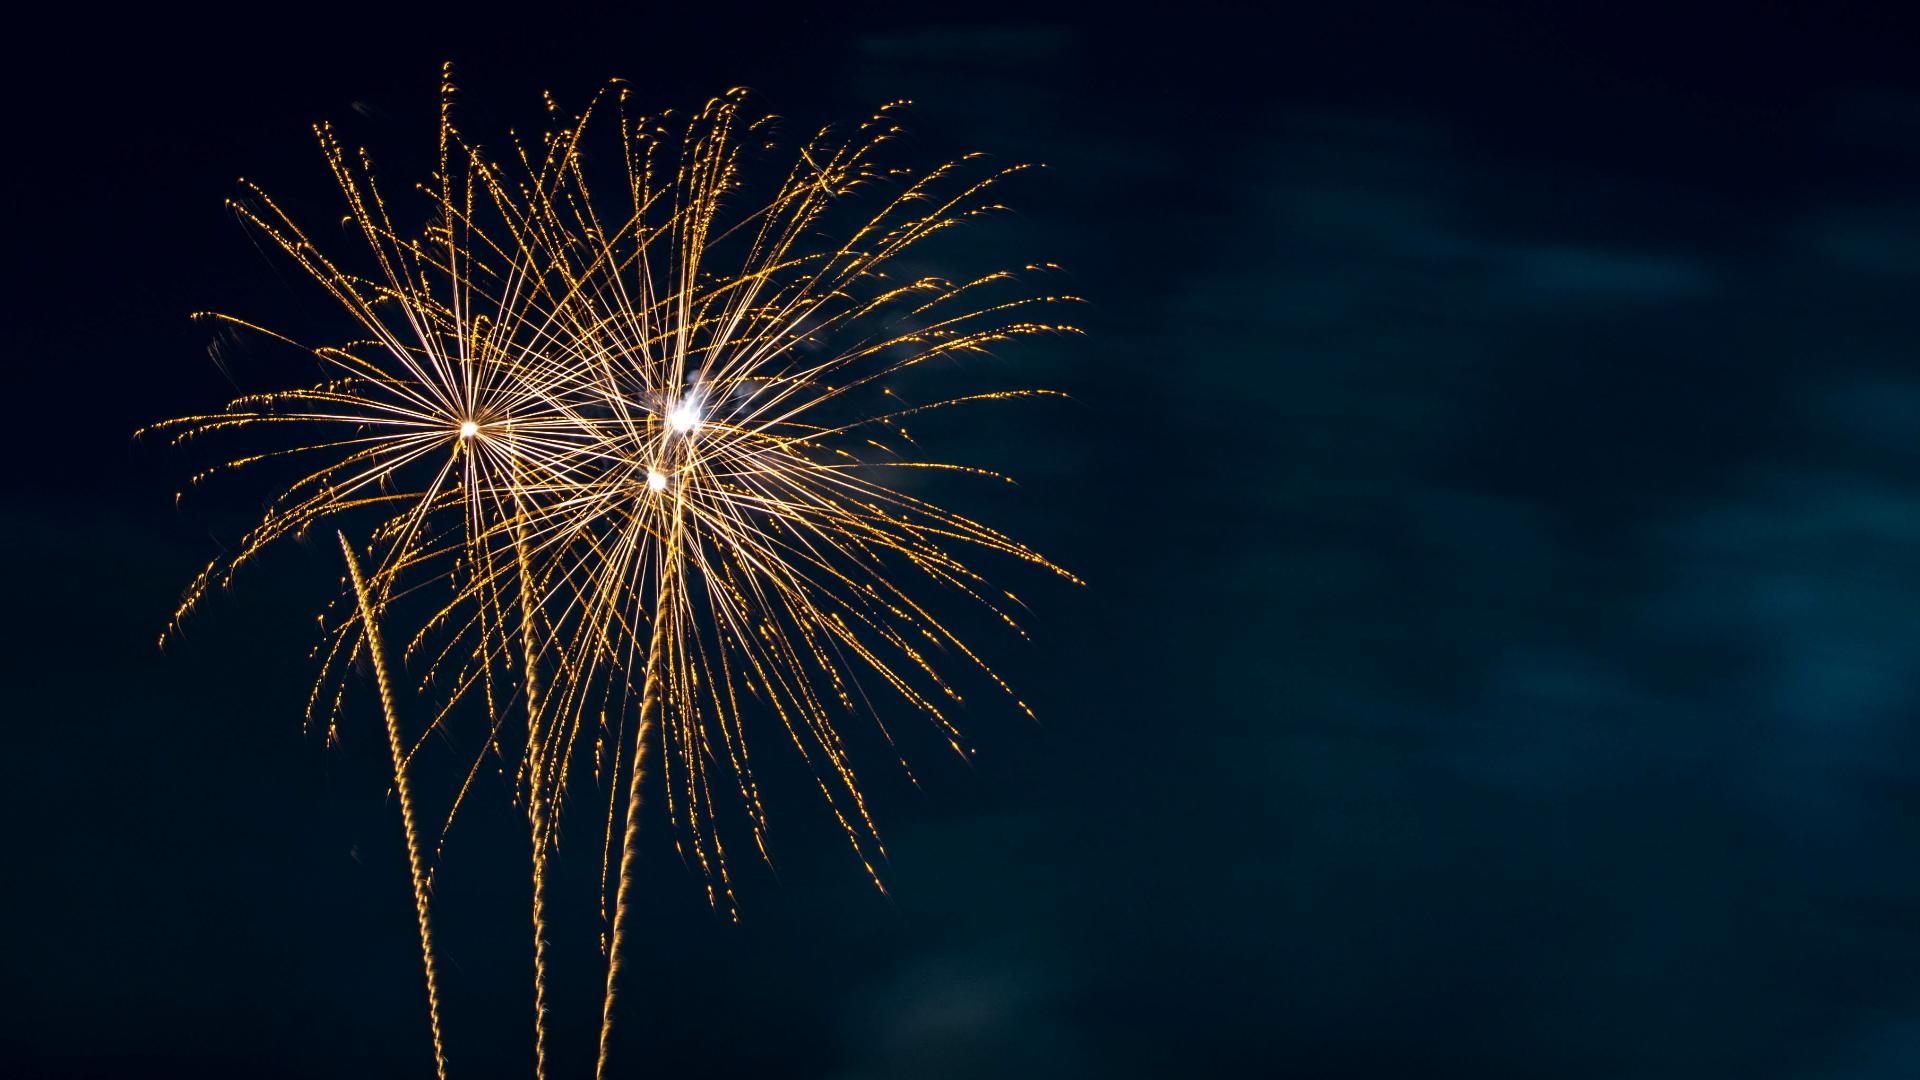 If you are planning to use fireworks at home, there are laws to abide by. Here's what to know.